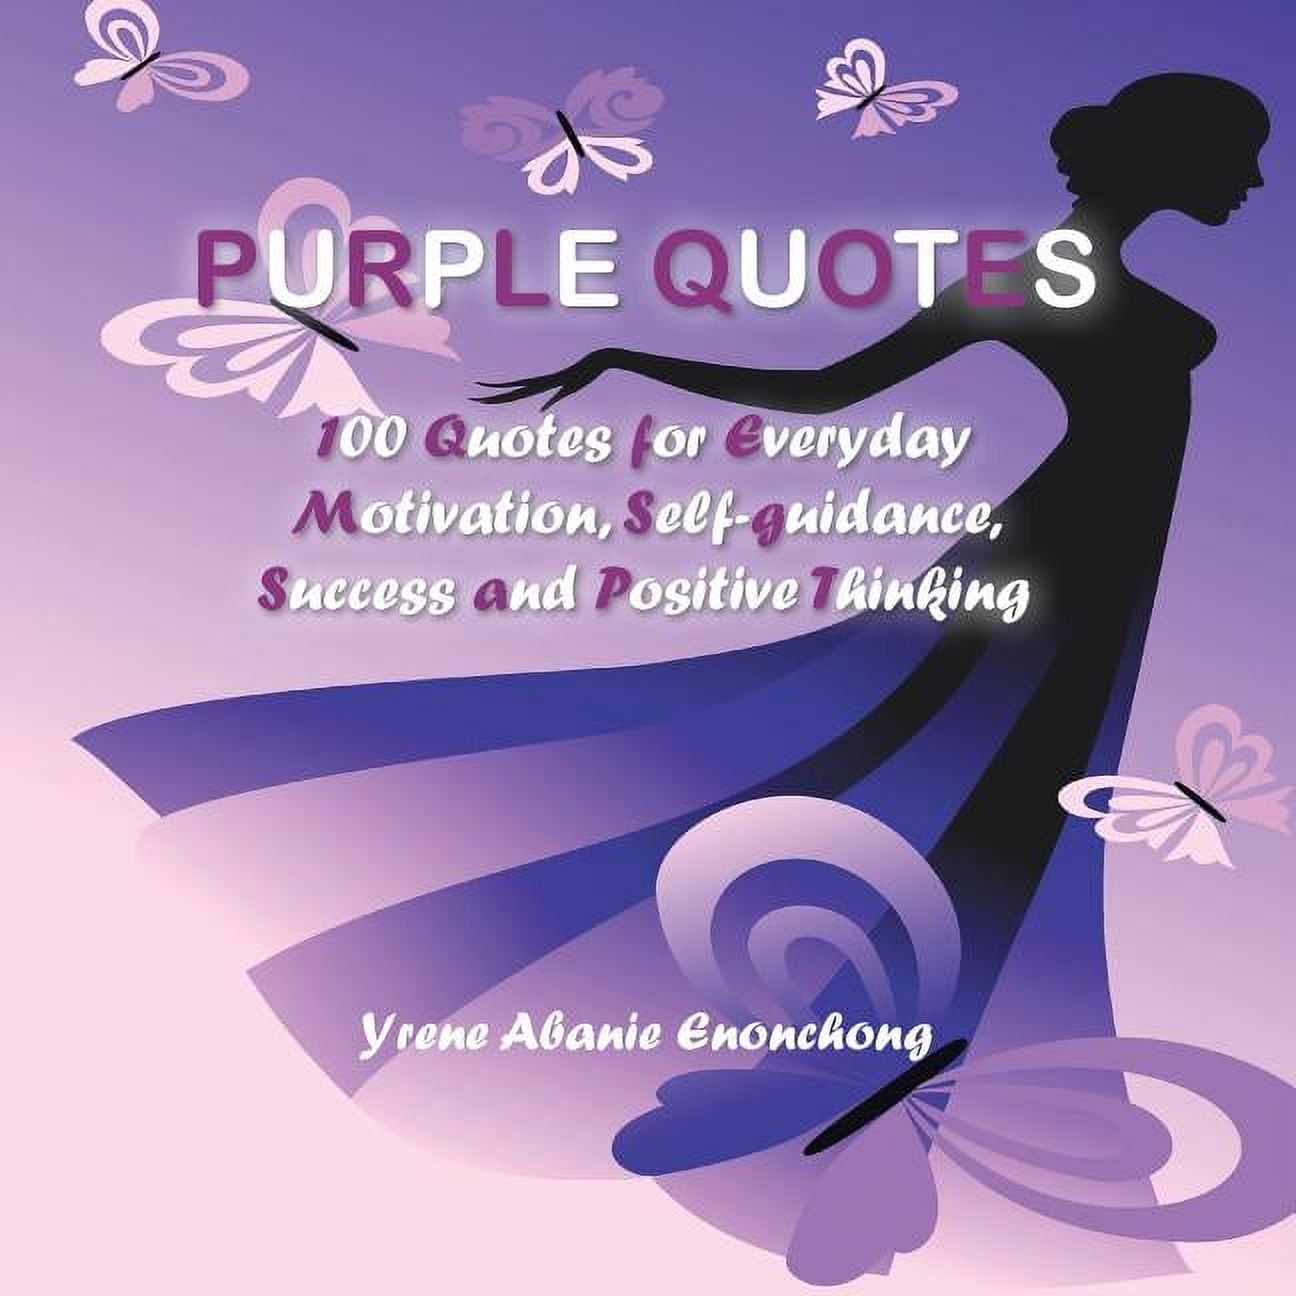 Purple Quotes: 100 Favorite Quotes to Uplift and Nurture Your Mind